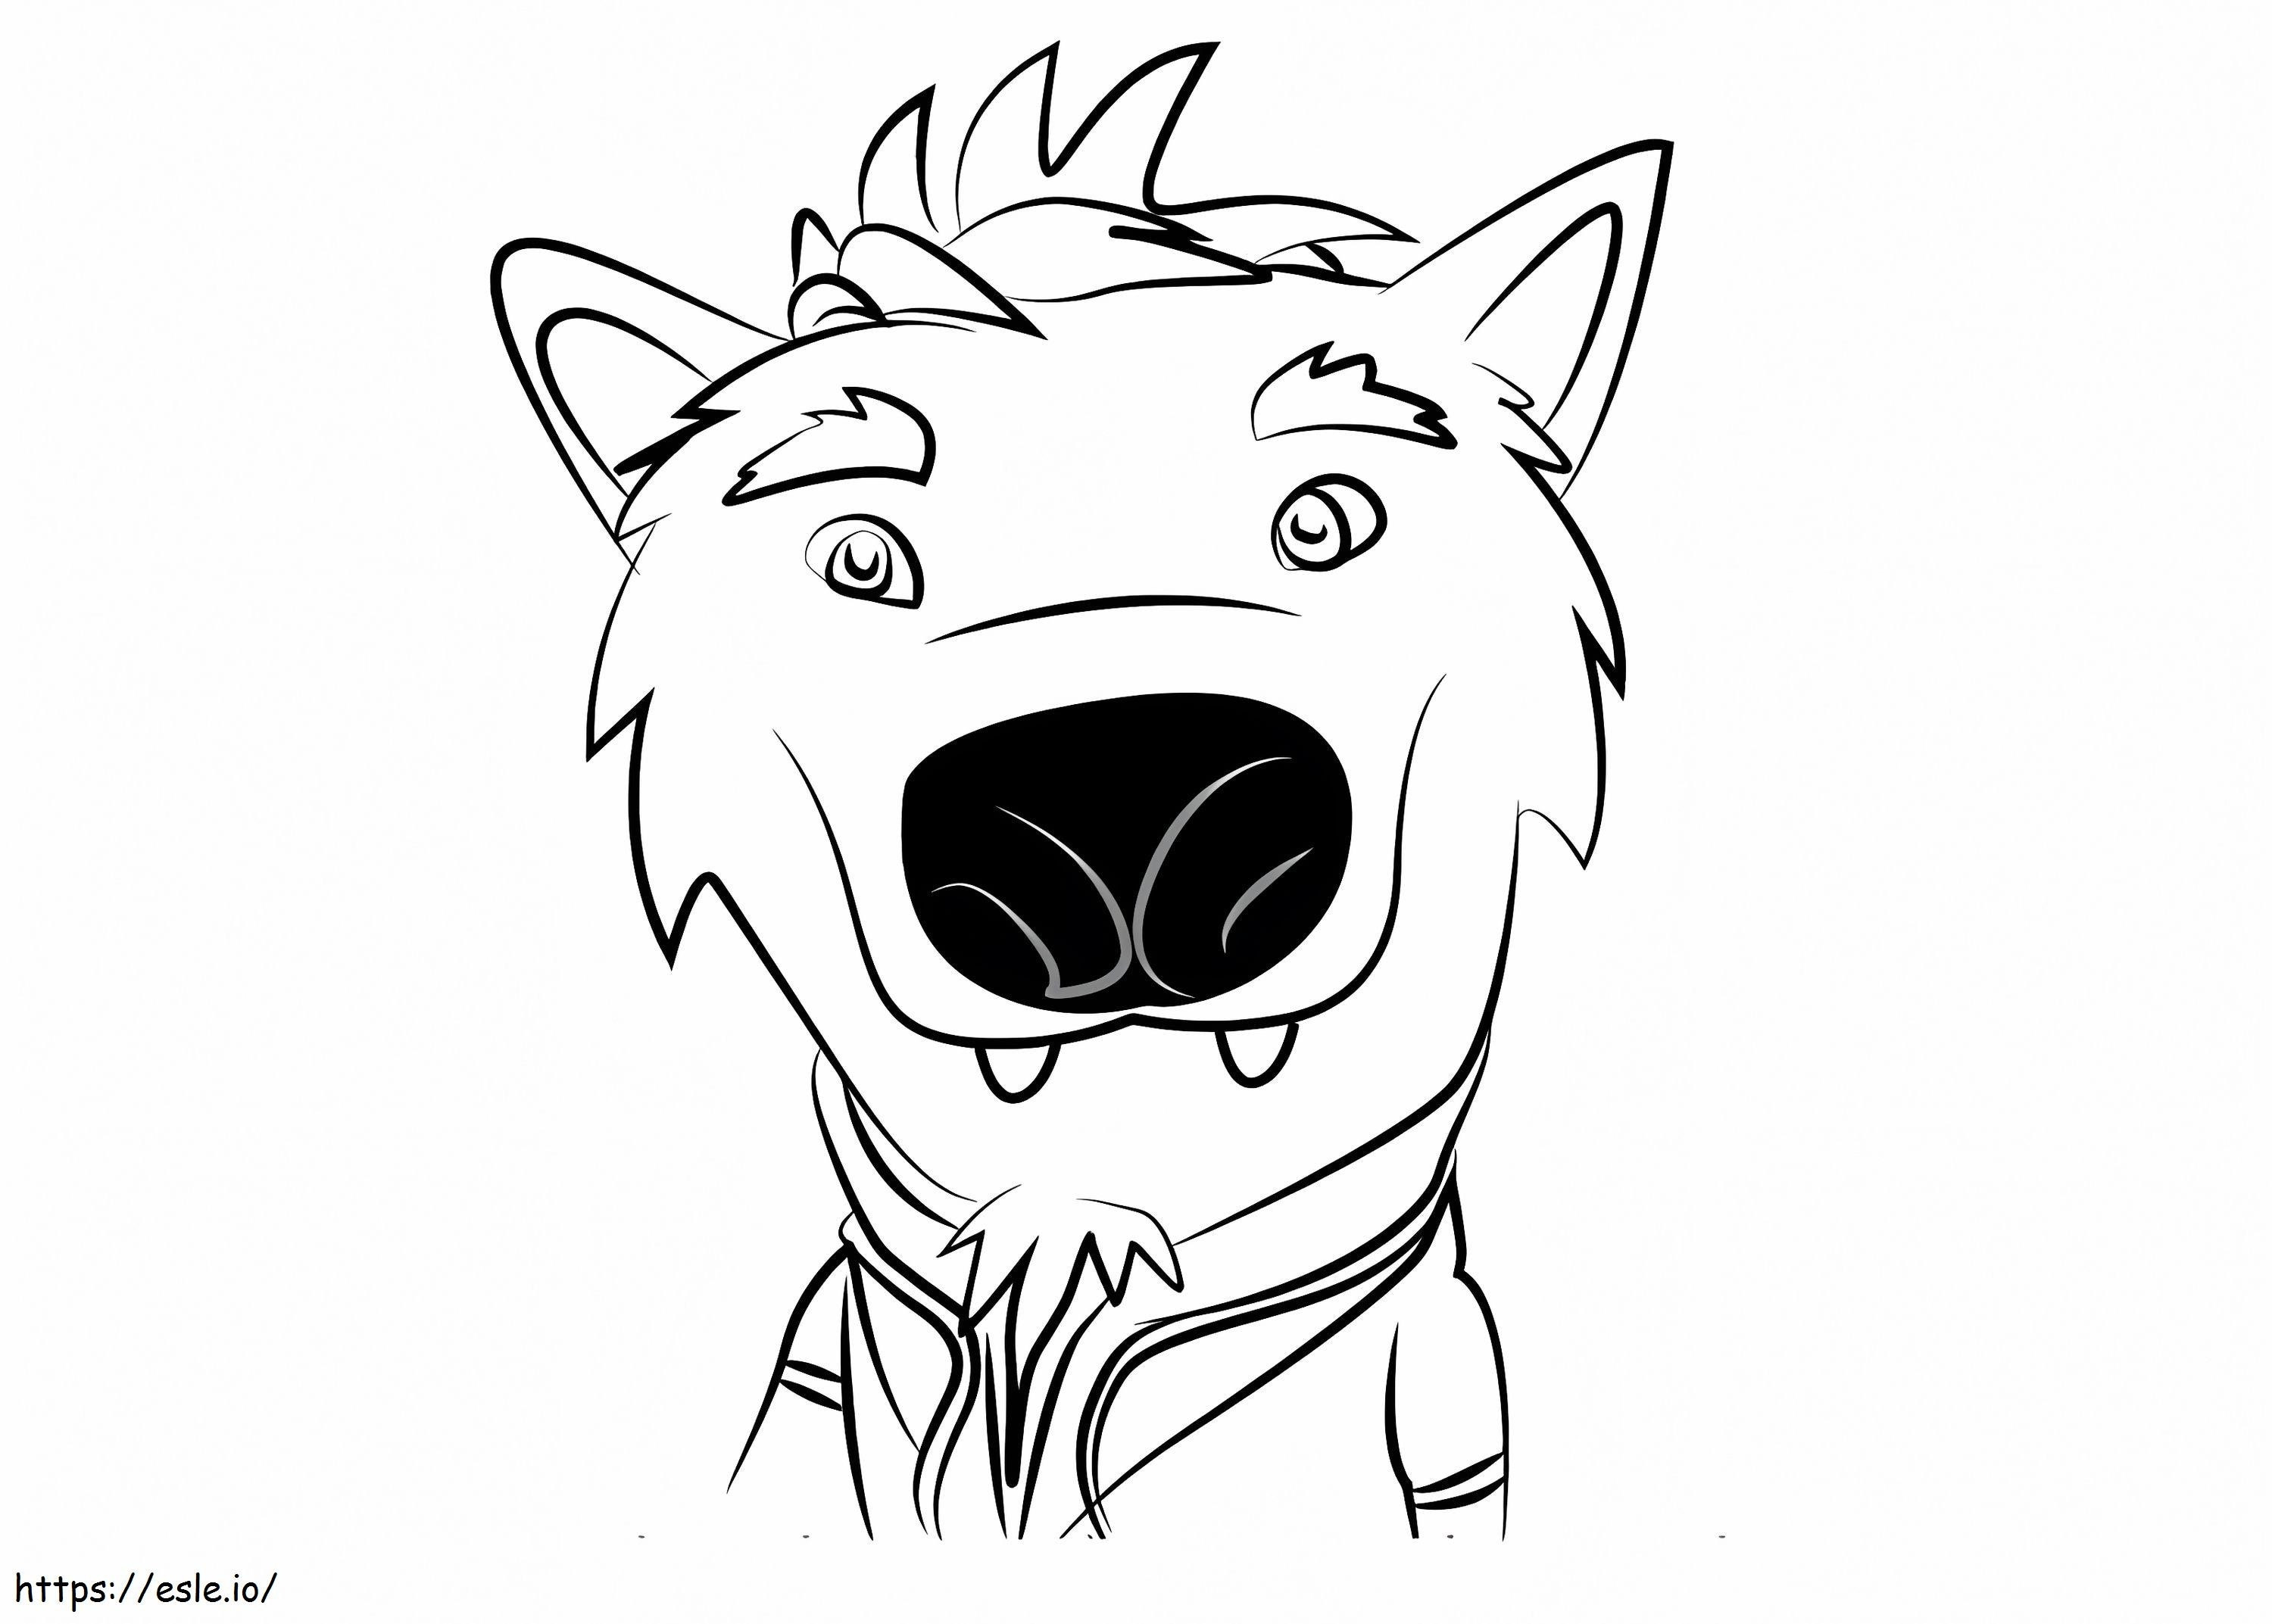 Dr. Wolf From Sheriff Callie coloring page